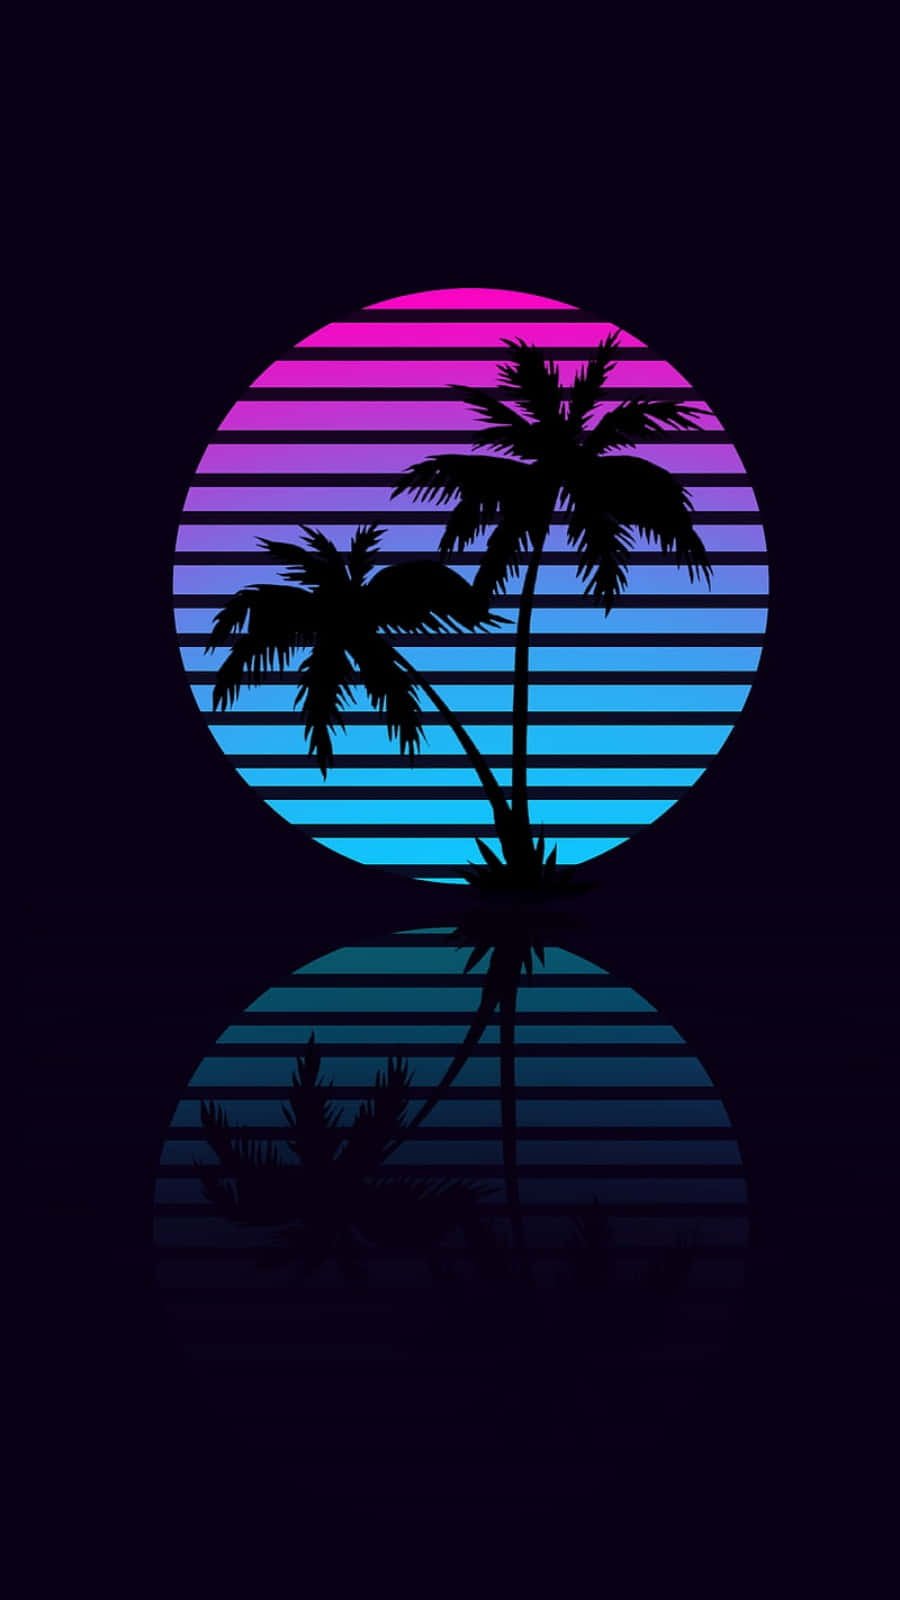 80s Vaporwave Neon Blue And Pink Aesthetic Wallpaper